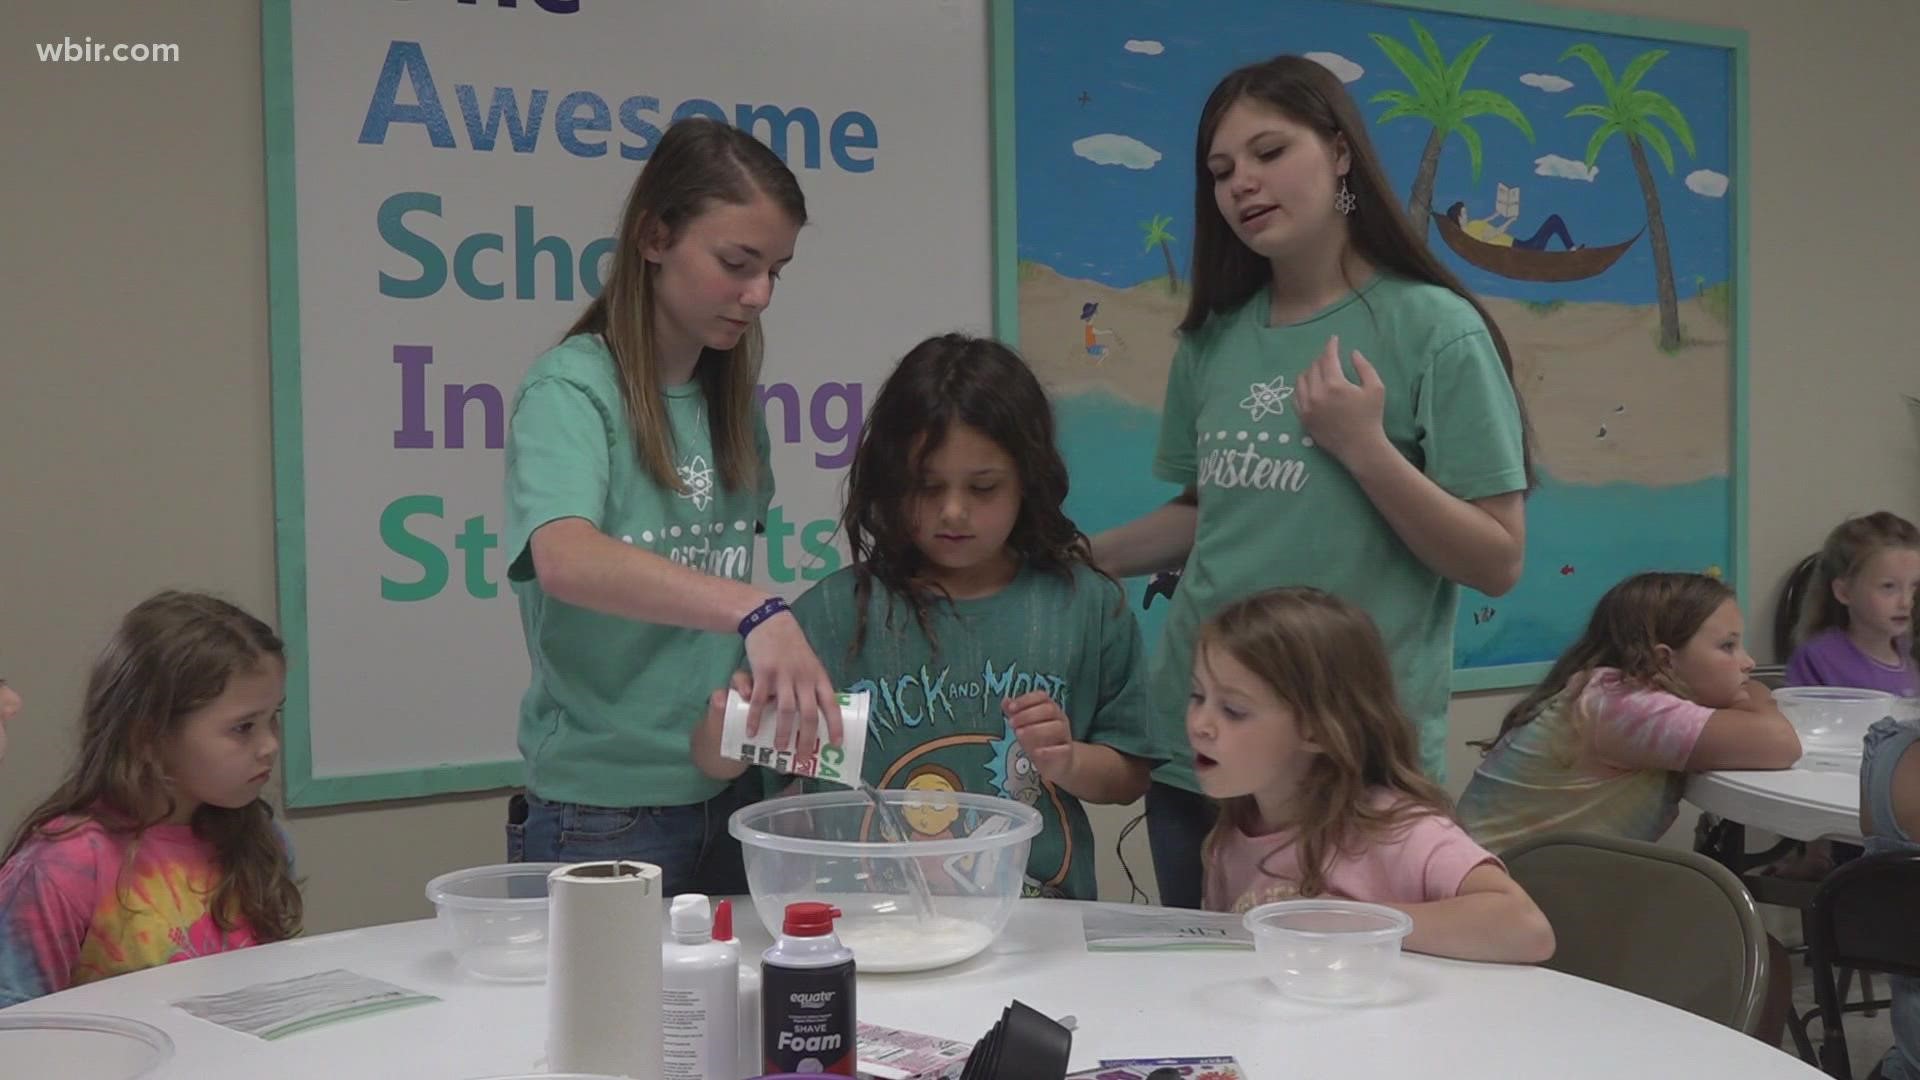 Anderson County High School students visited Lake City Elementary to make slime with the young girls, showing them some principles of science.